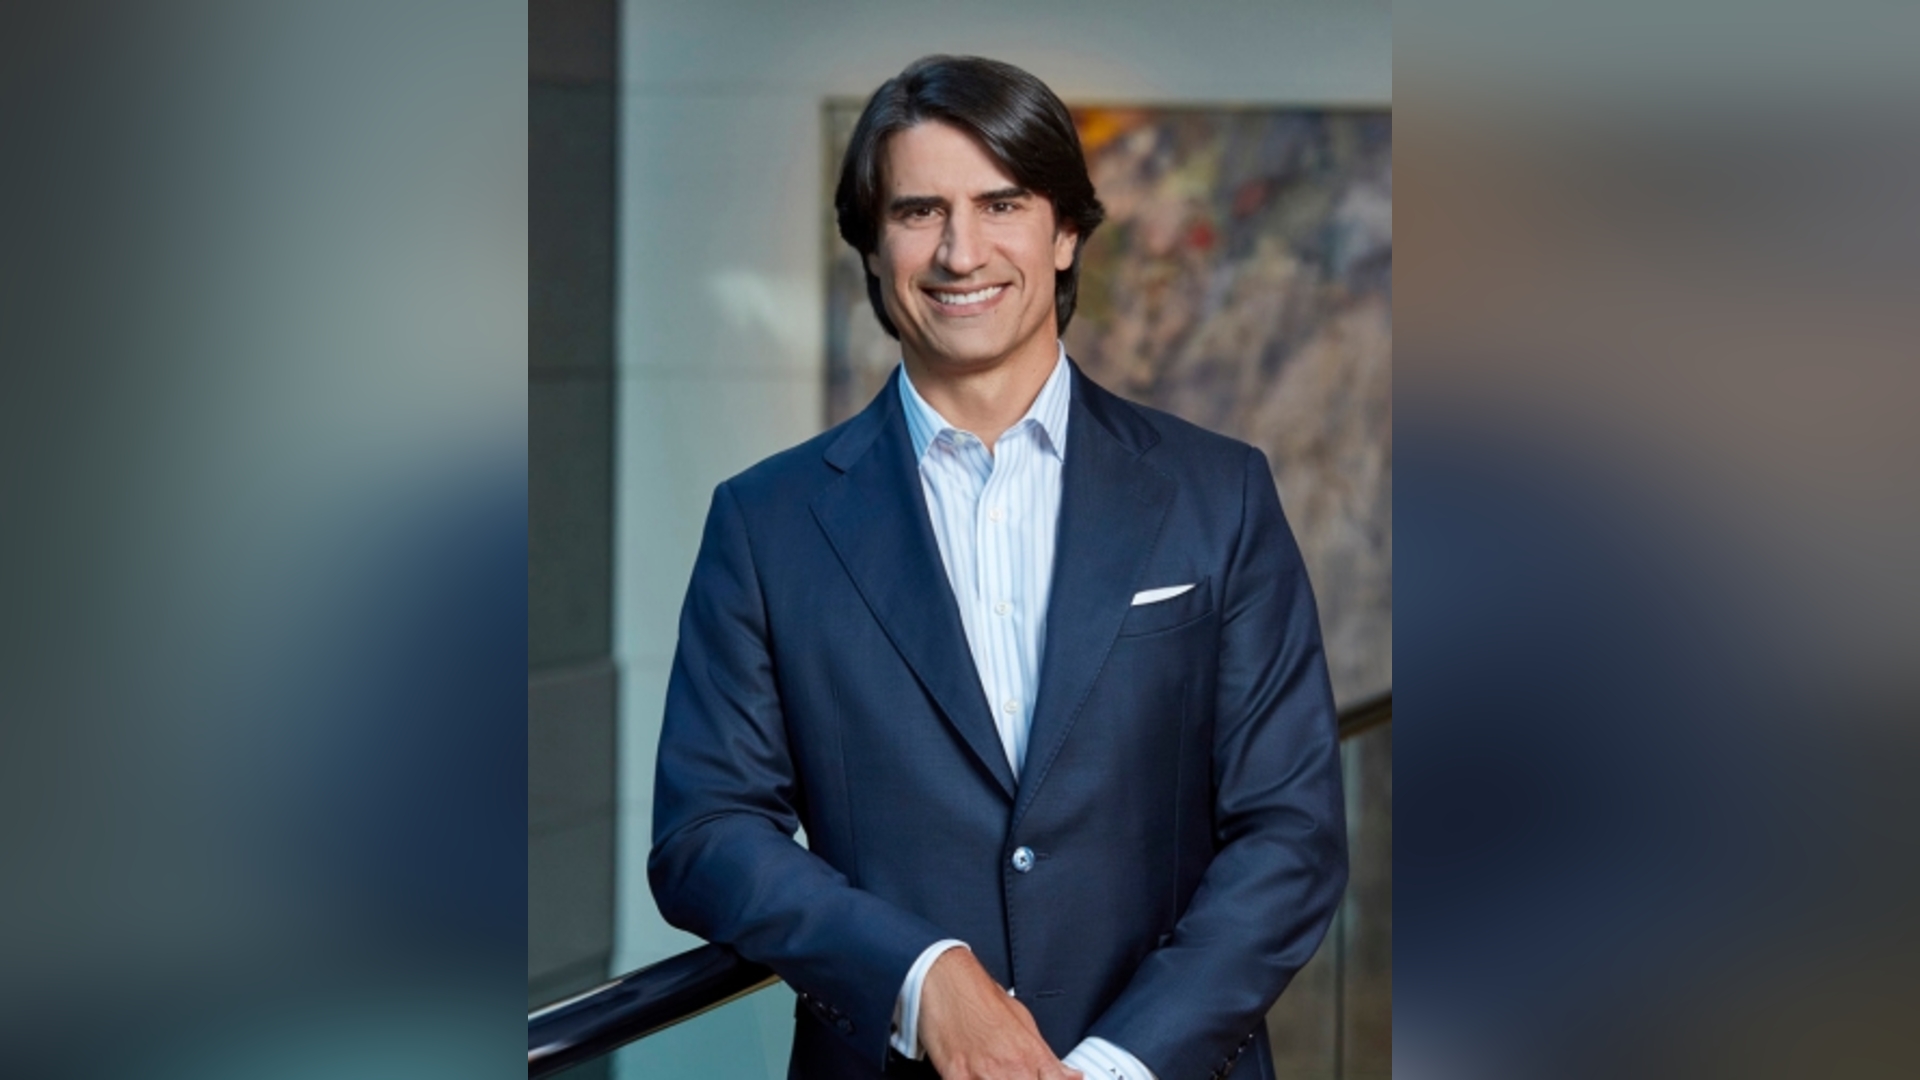 Alejandro Reynal, President and CEO of Four Seasons Hotels and Resorts